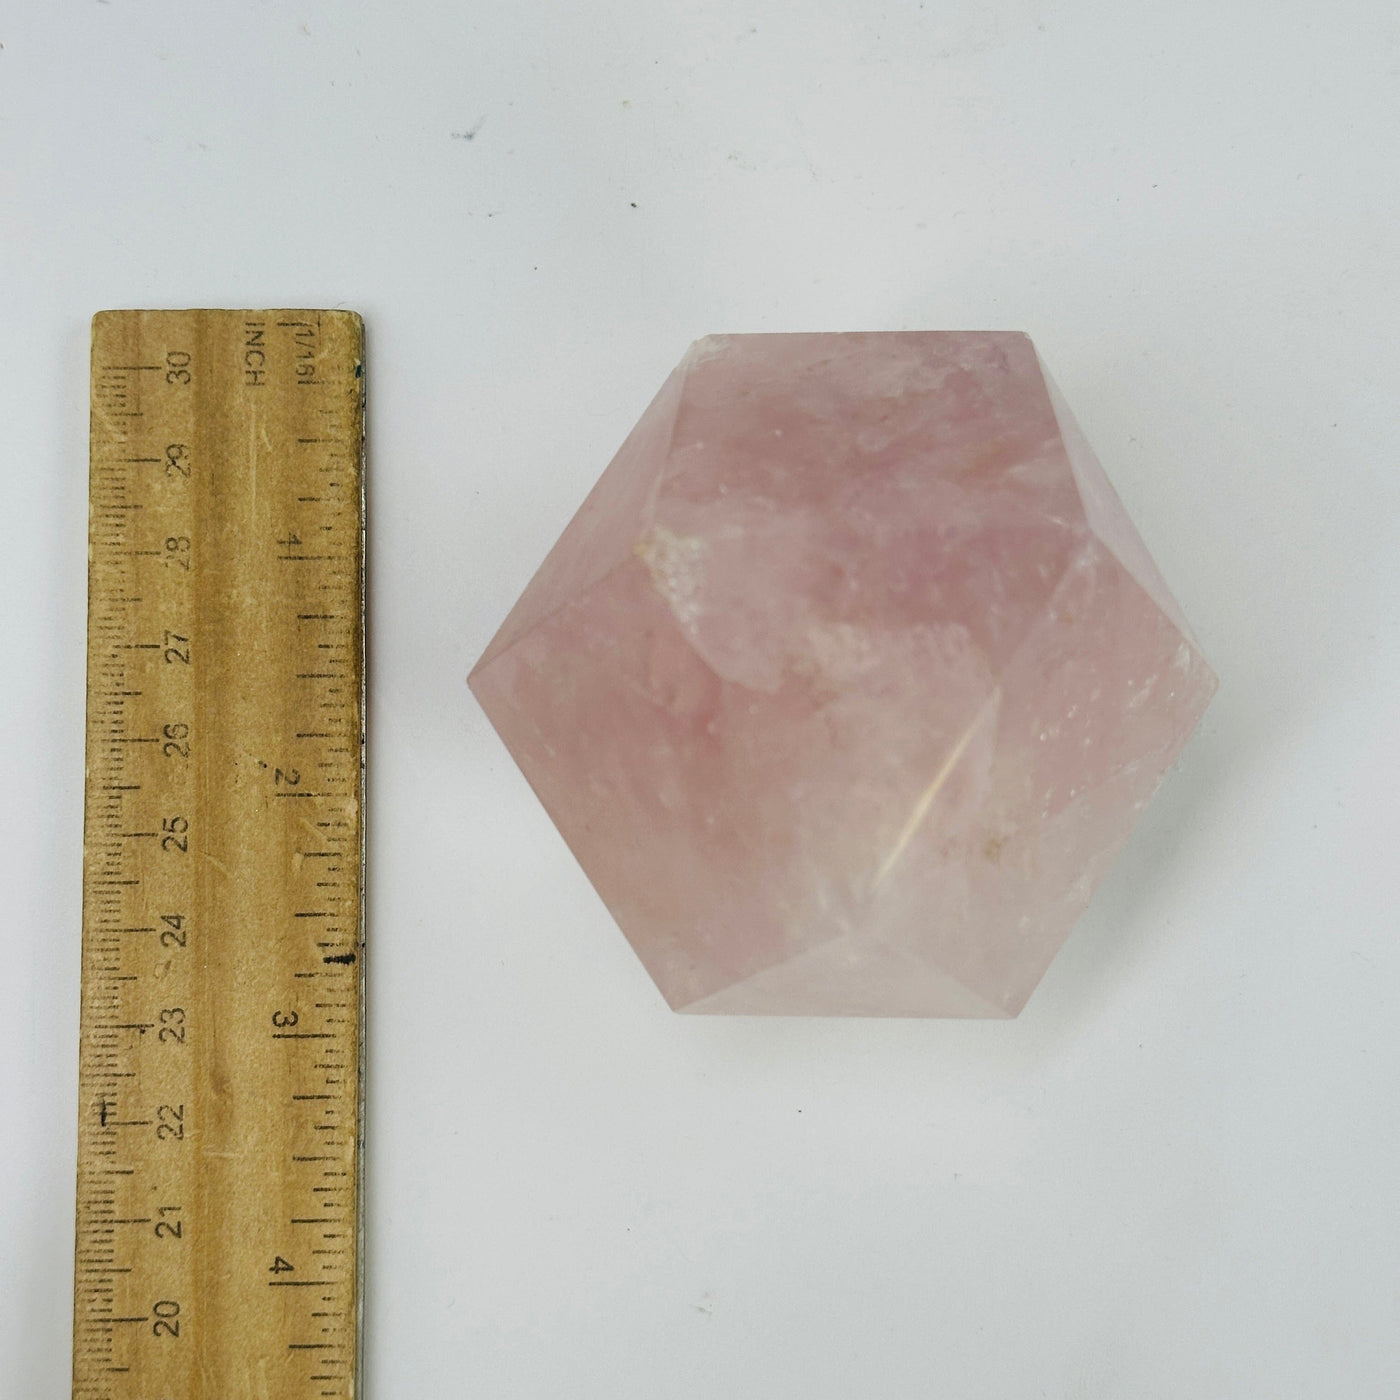 rose quartz dodecahedron next to a ruler for size reference